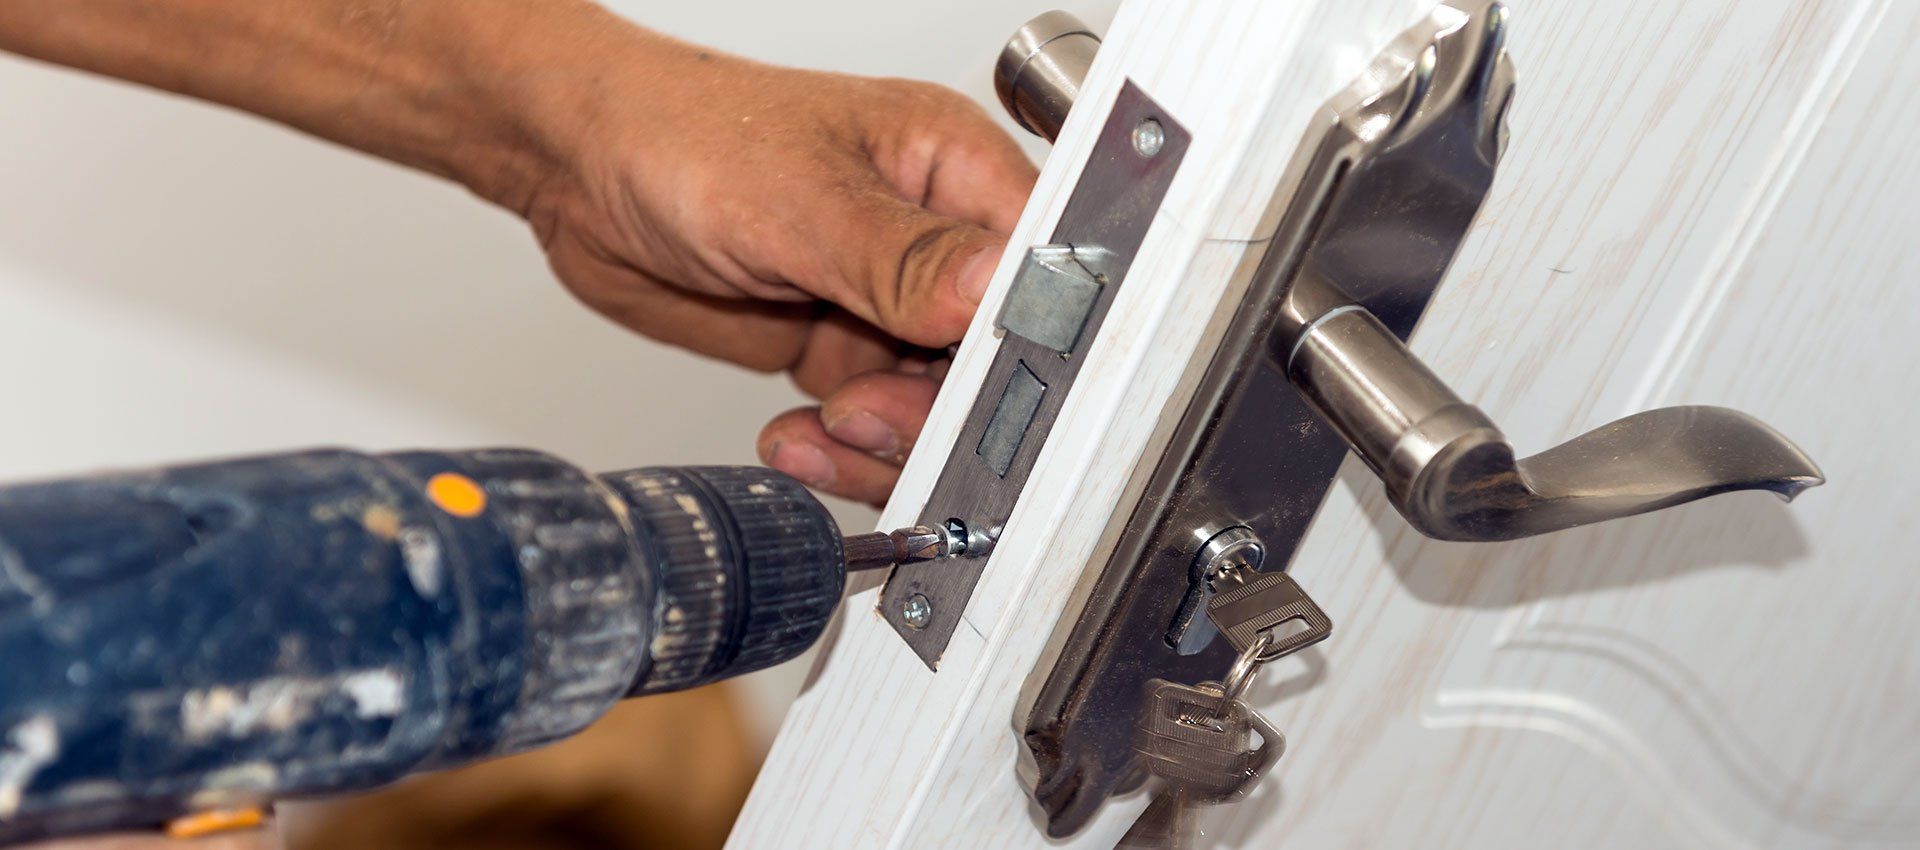 You can count on us for your door handle repairs